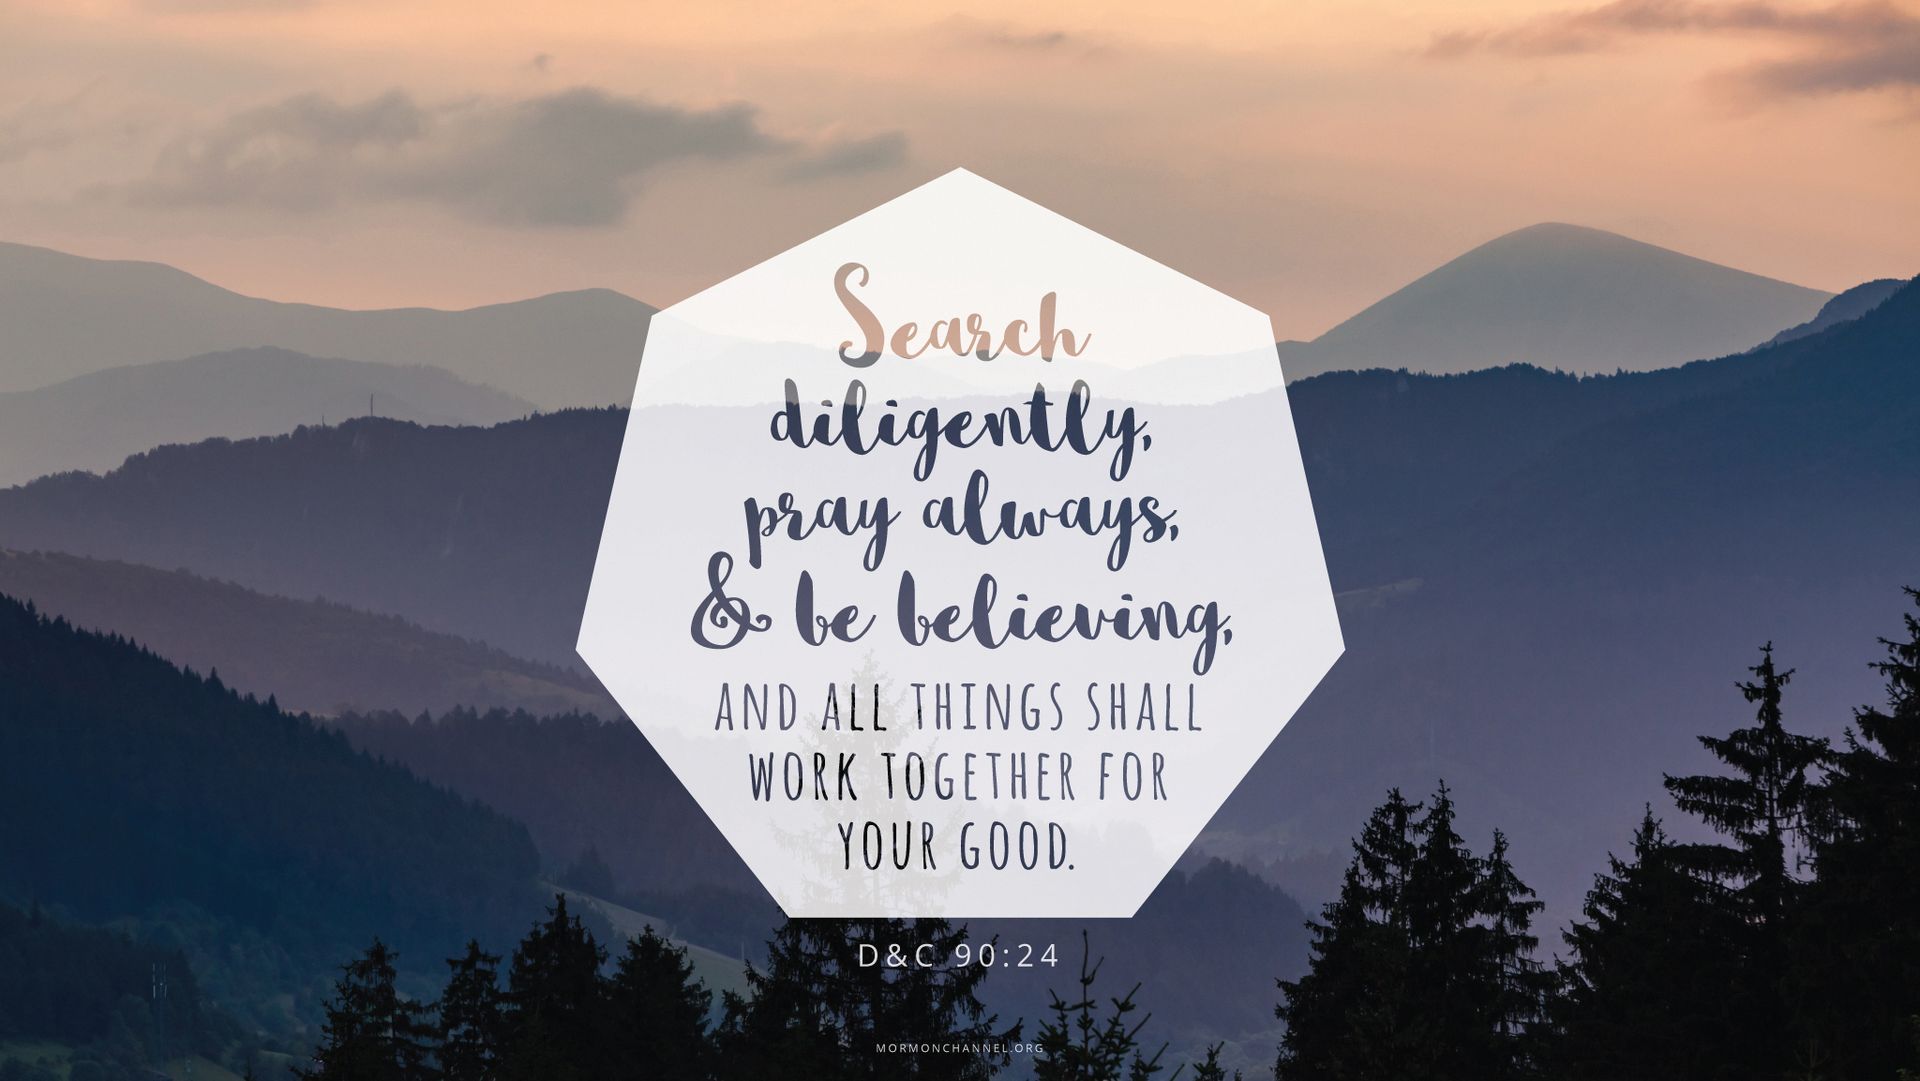 “Search diligently, pray always, and be believing, and all things shall work together for your good.”—Doctrine and Covenants 90:24